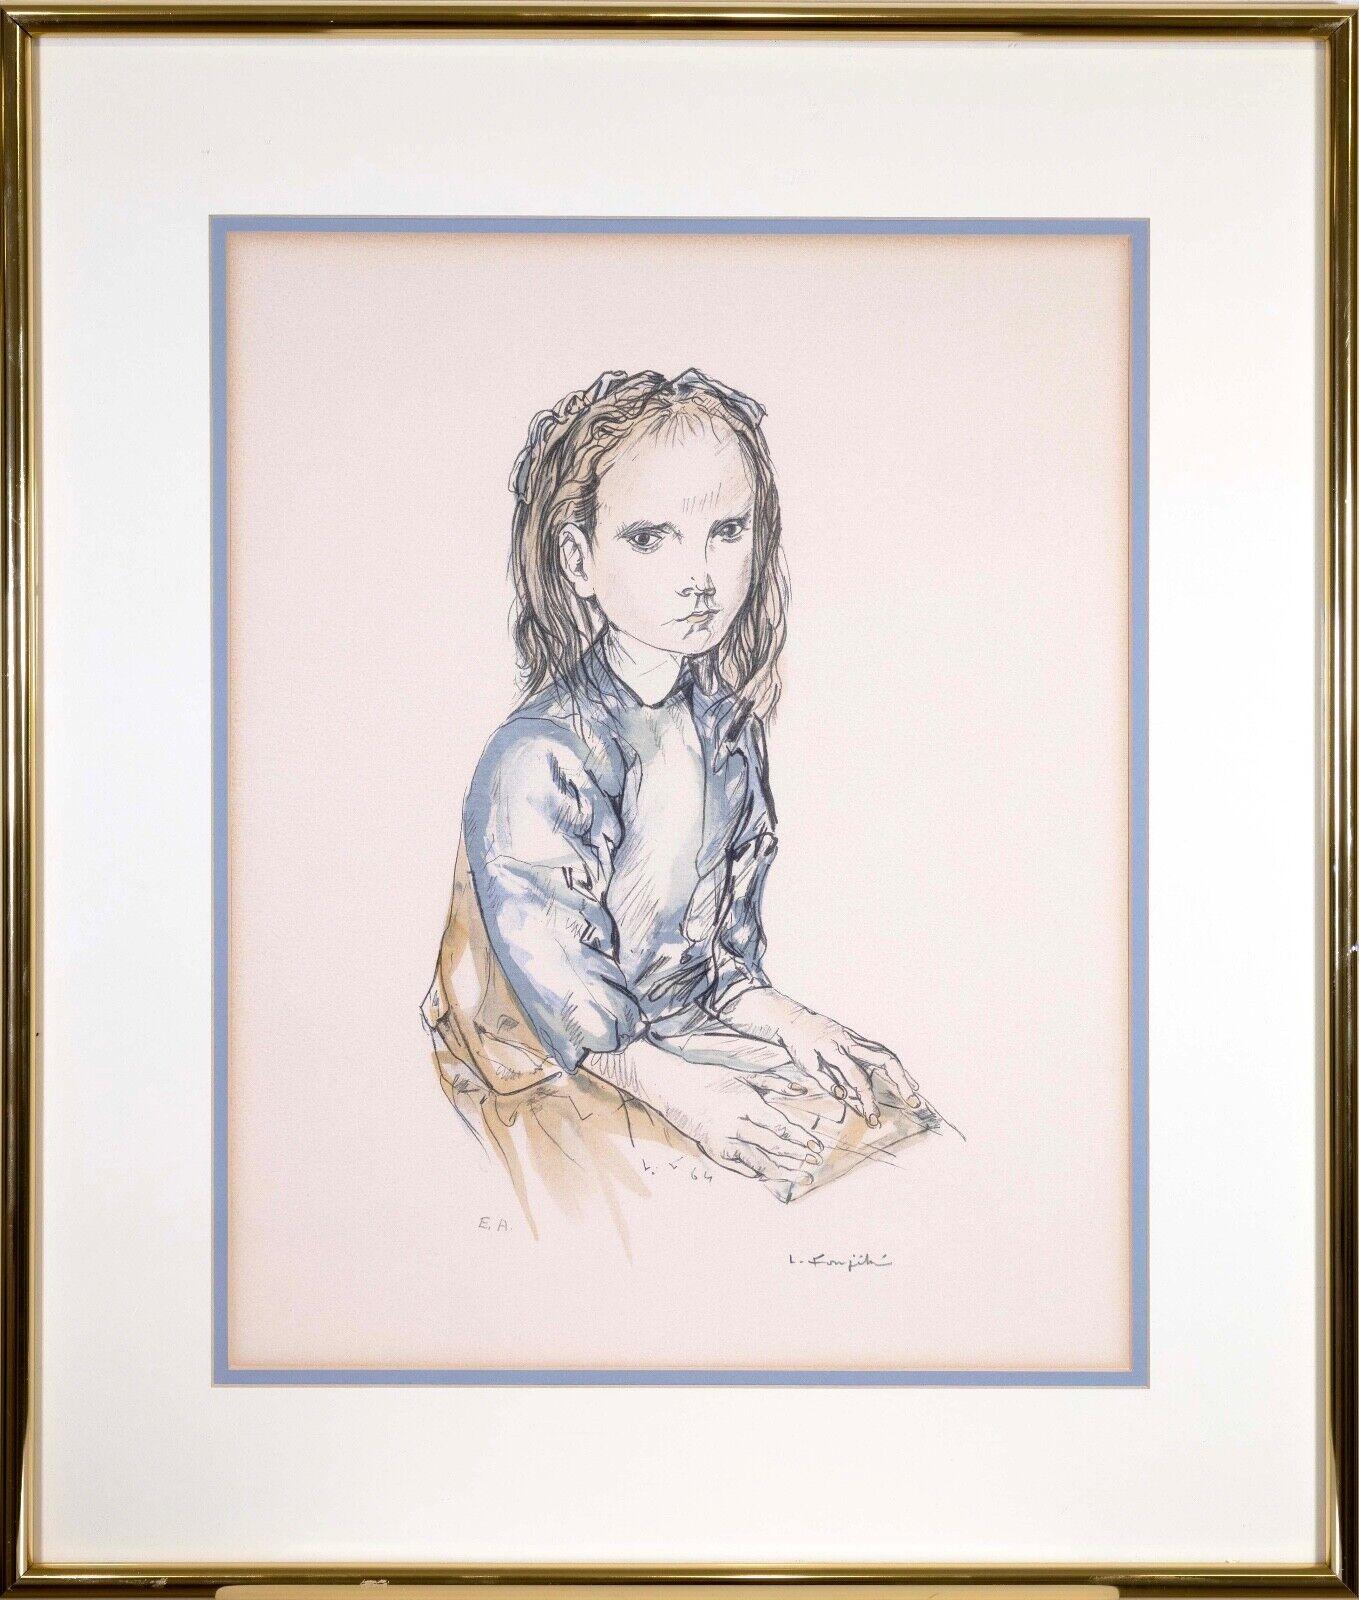 An introspective lithograph in colors on paper titled “Girl Holding a Letter” by Japanese French artist Leonard Tsugouharu Foujita. Hand signed in pencil on the bottom right with an E.A. annotation on the bottom left. Published in 1964. Cat. Rais.